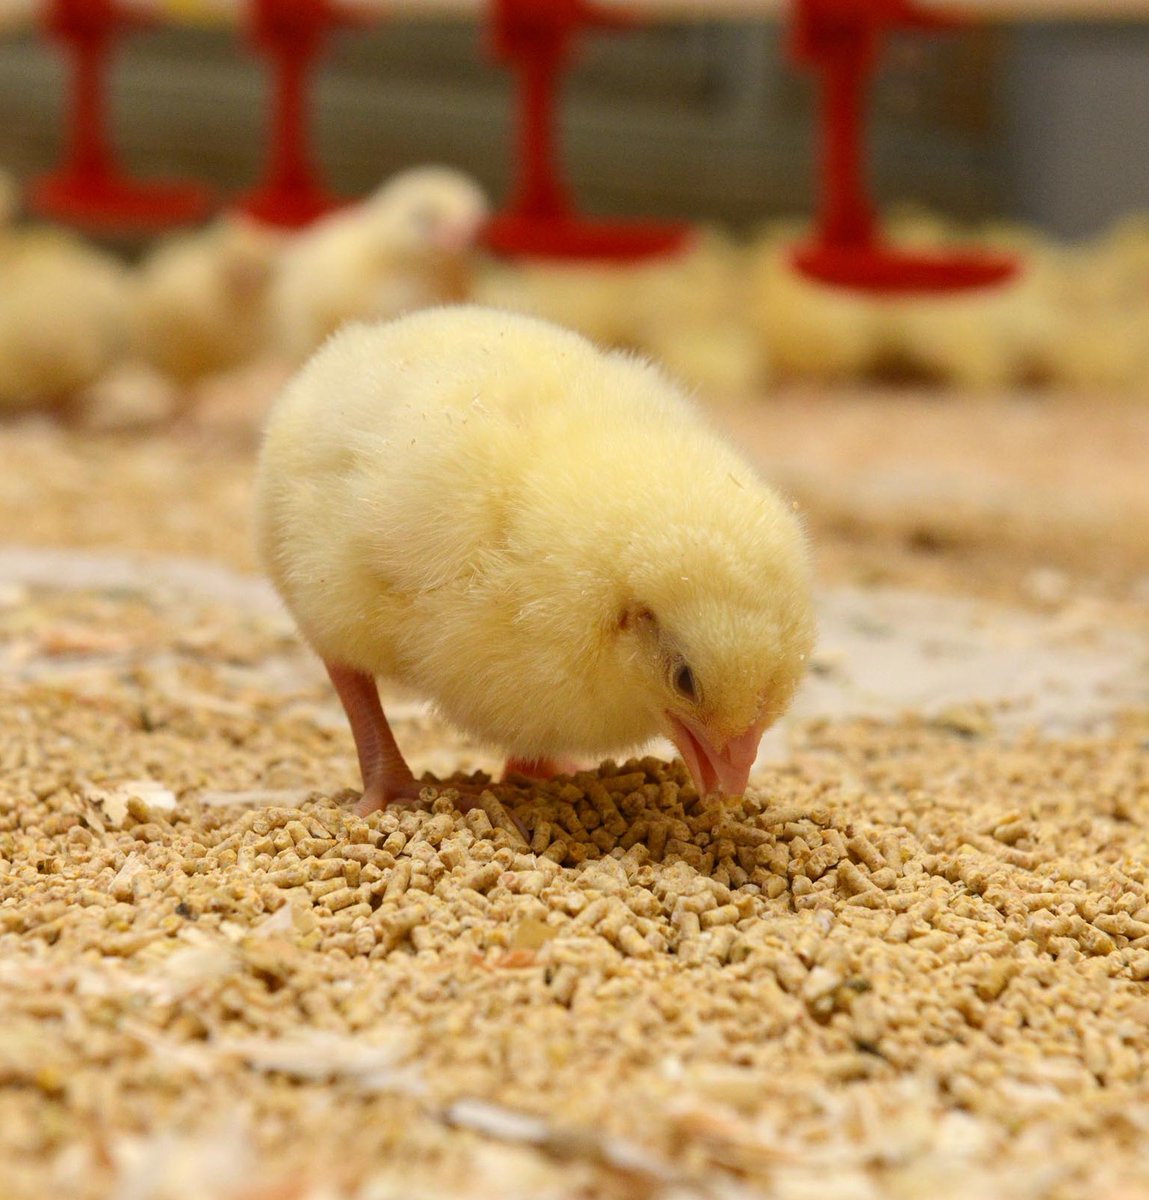 Ensure your chicks get off to the best possible start with AlphaStart. Specifically formulated to support gut development and supply optimum protein levels, enabling amino acid sparing and efficient protein utilisation. To find out more visit our website: https://t.co/TmZ33mnn53 https://t.co/ygCvh83stn